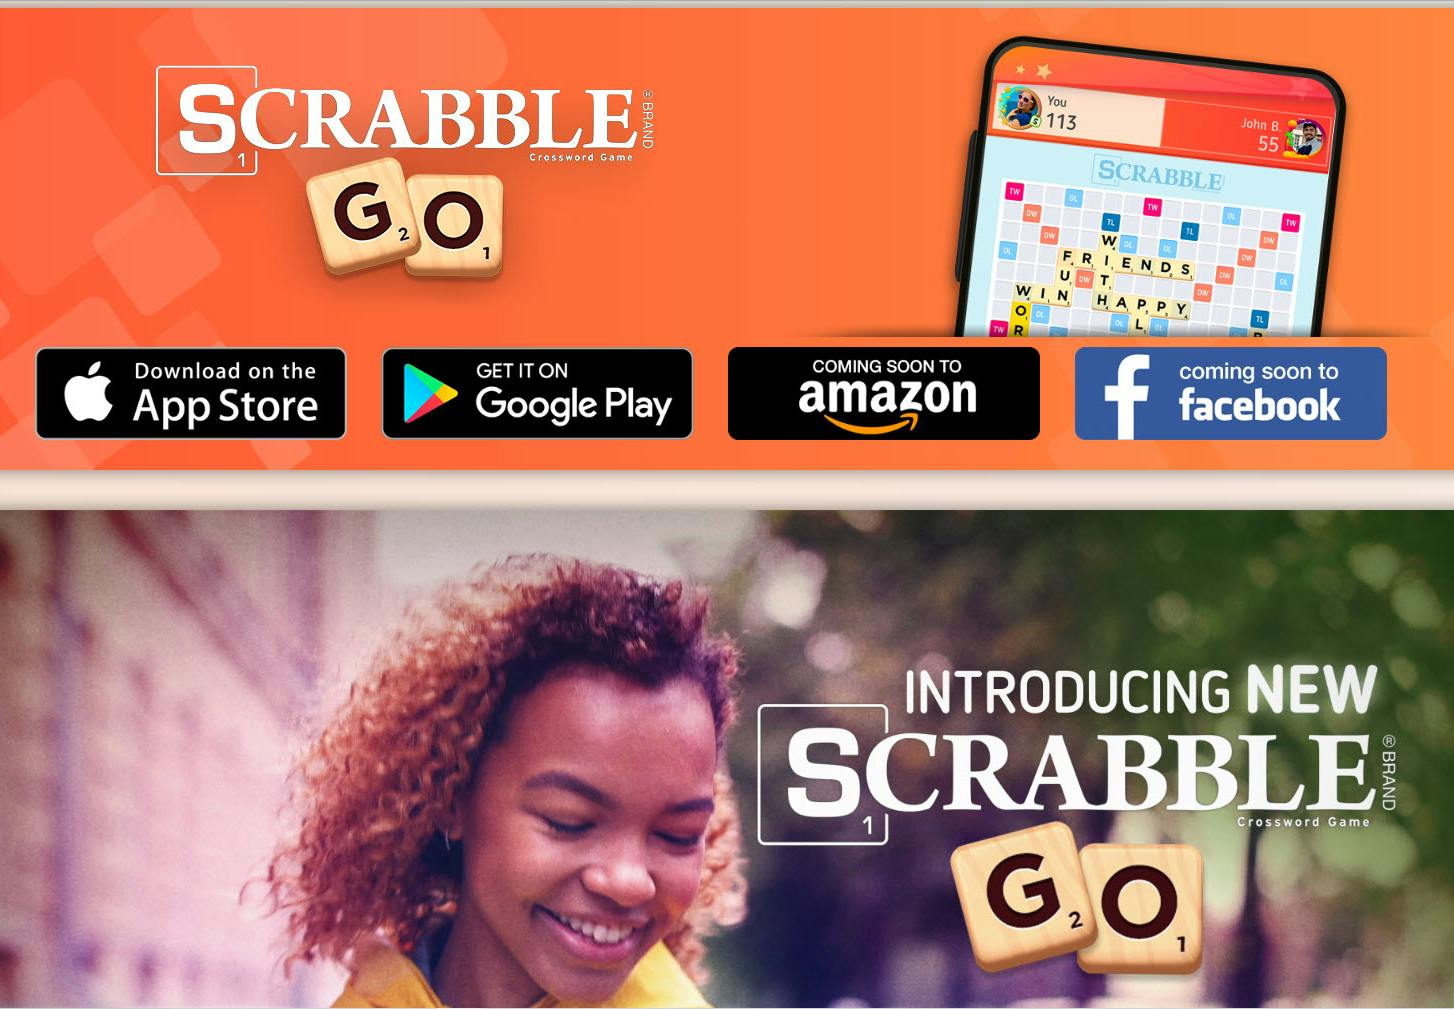 Scrabble Go online game with the words Scrabble Go and a lady looking down while smiling.